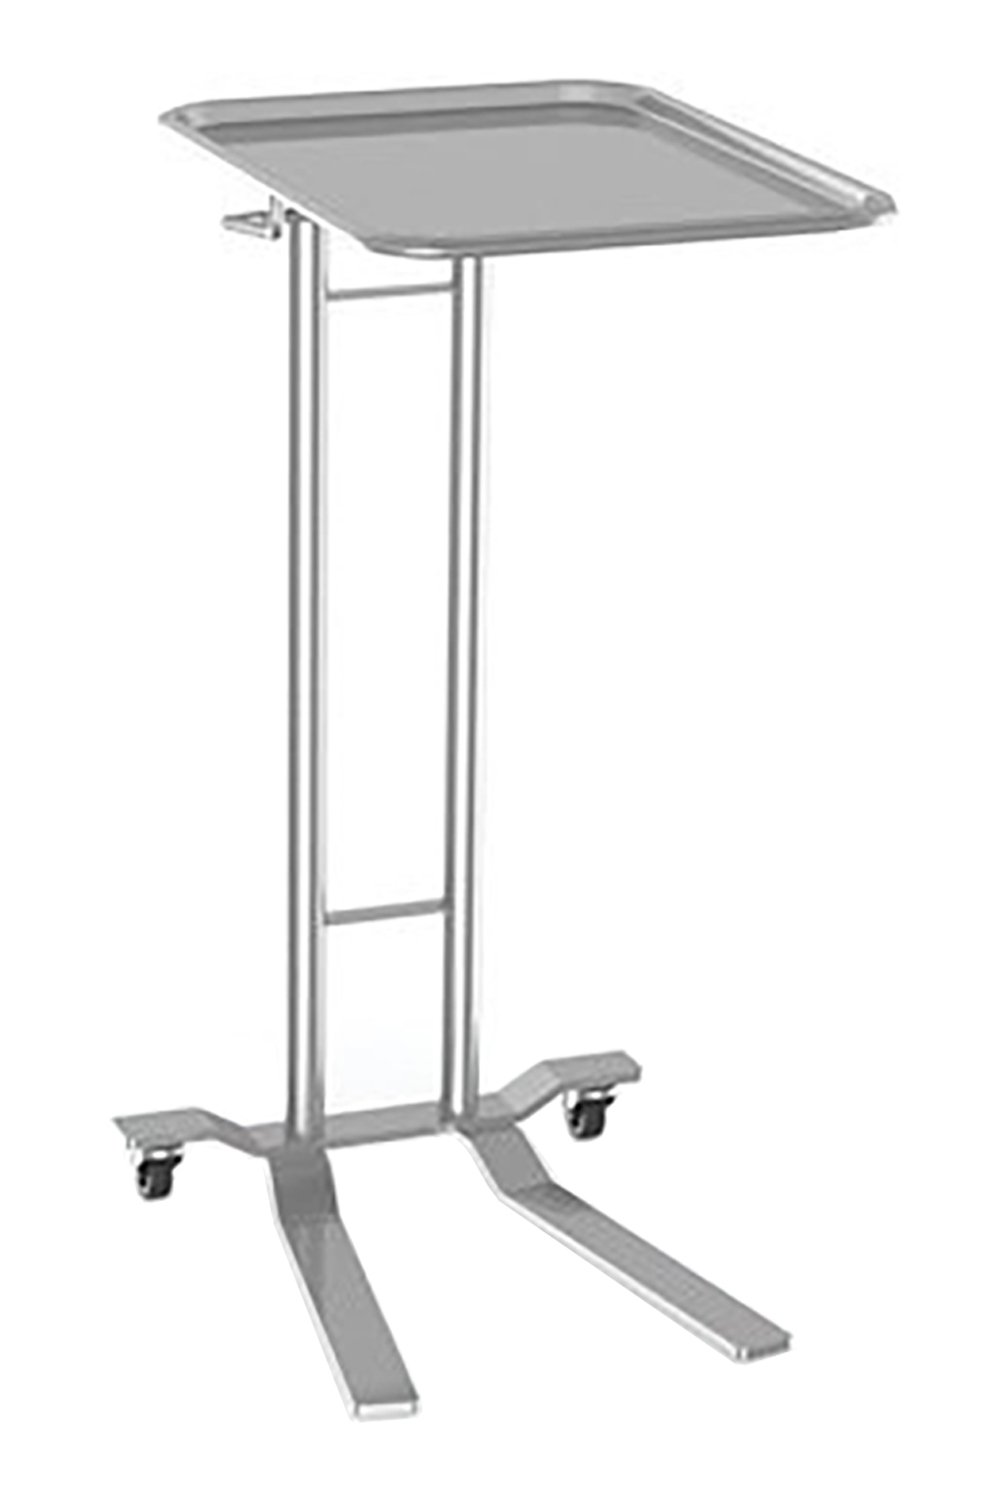 Fixed Height Mayo Stand, Dual Post Stainless Solutions Macmedical 